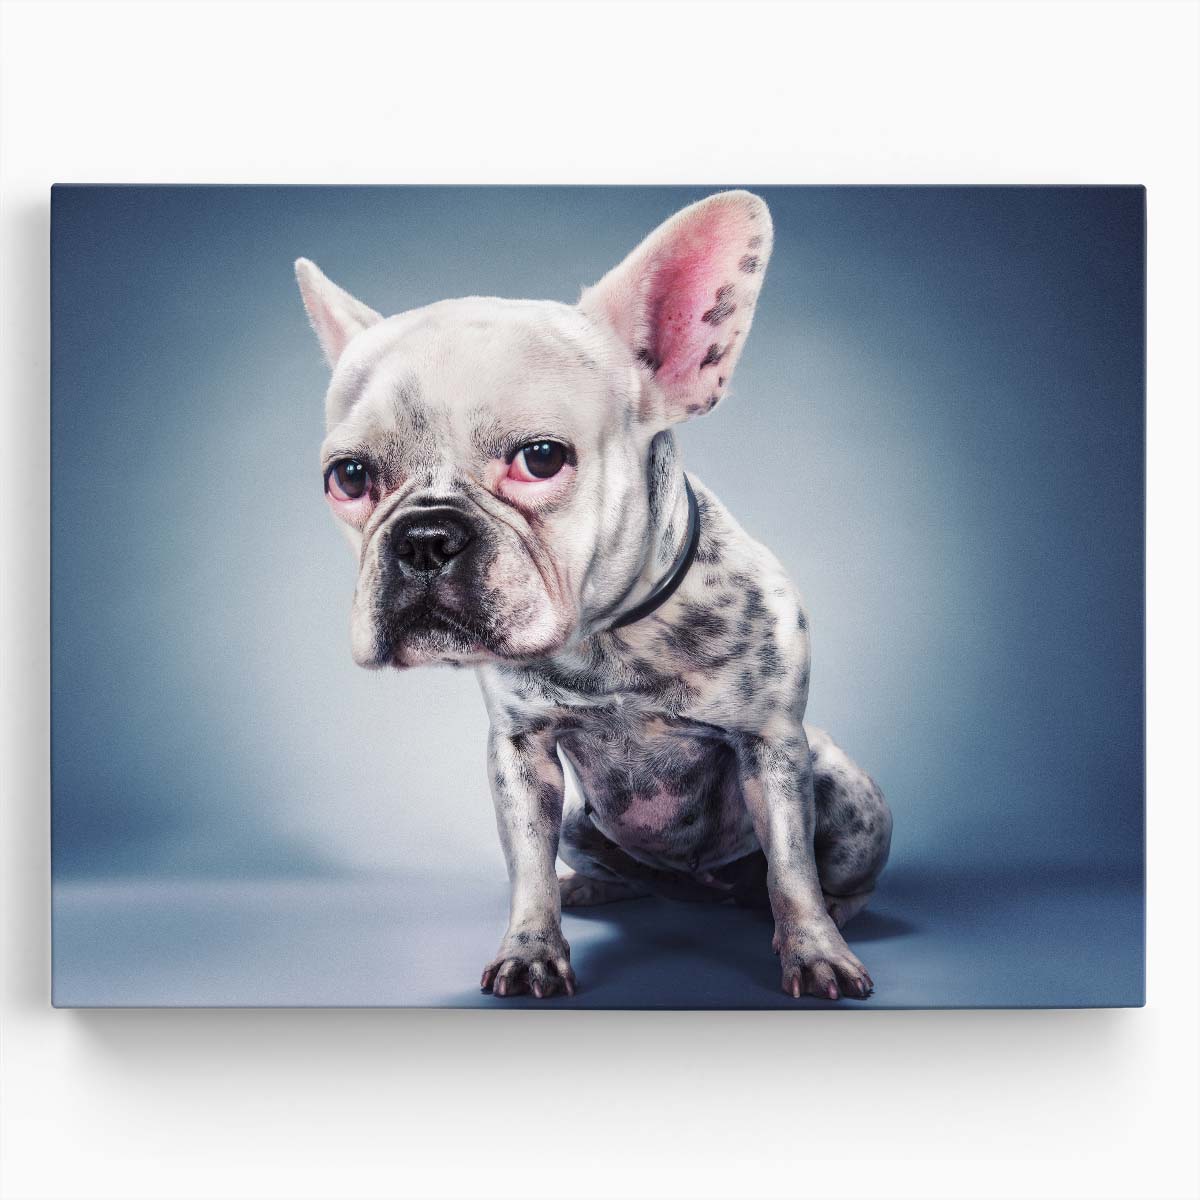 Creative Pink French Bulldog with Big Ears Wall Art by Luxuriance Designs. Made in USA.